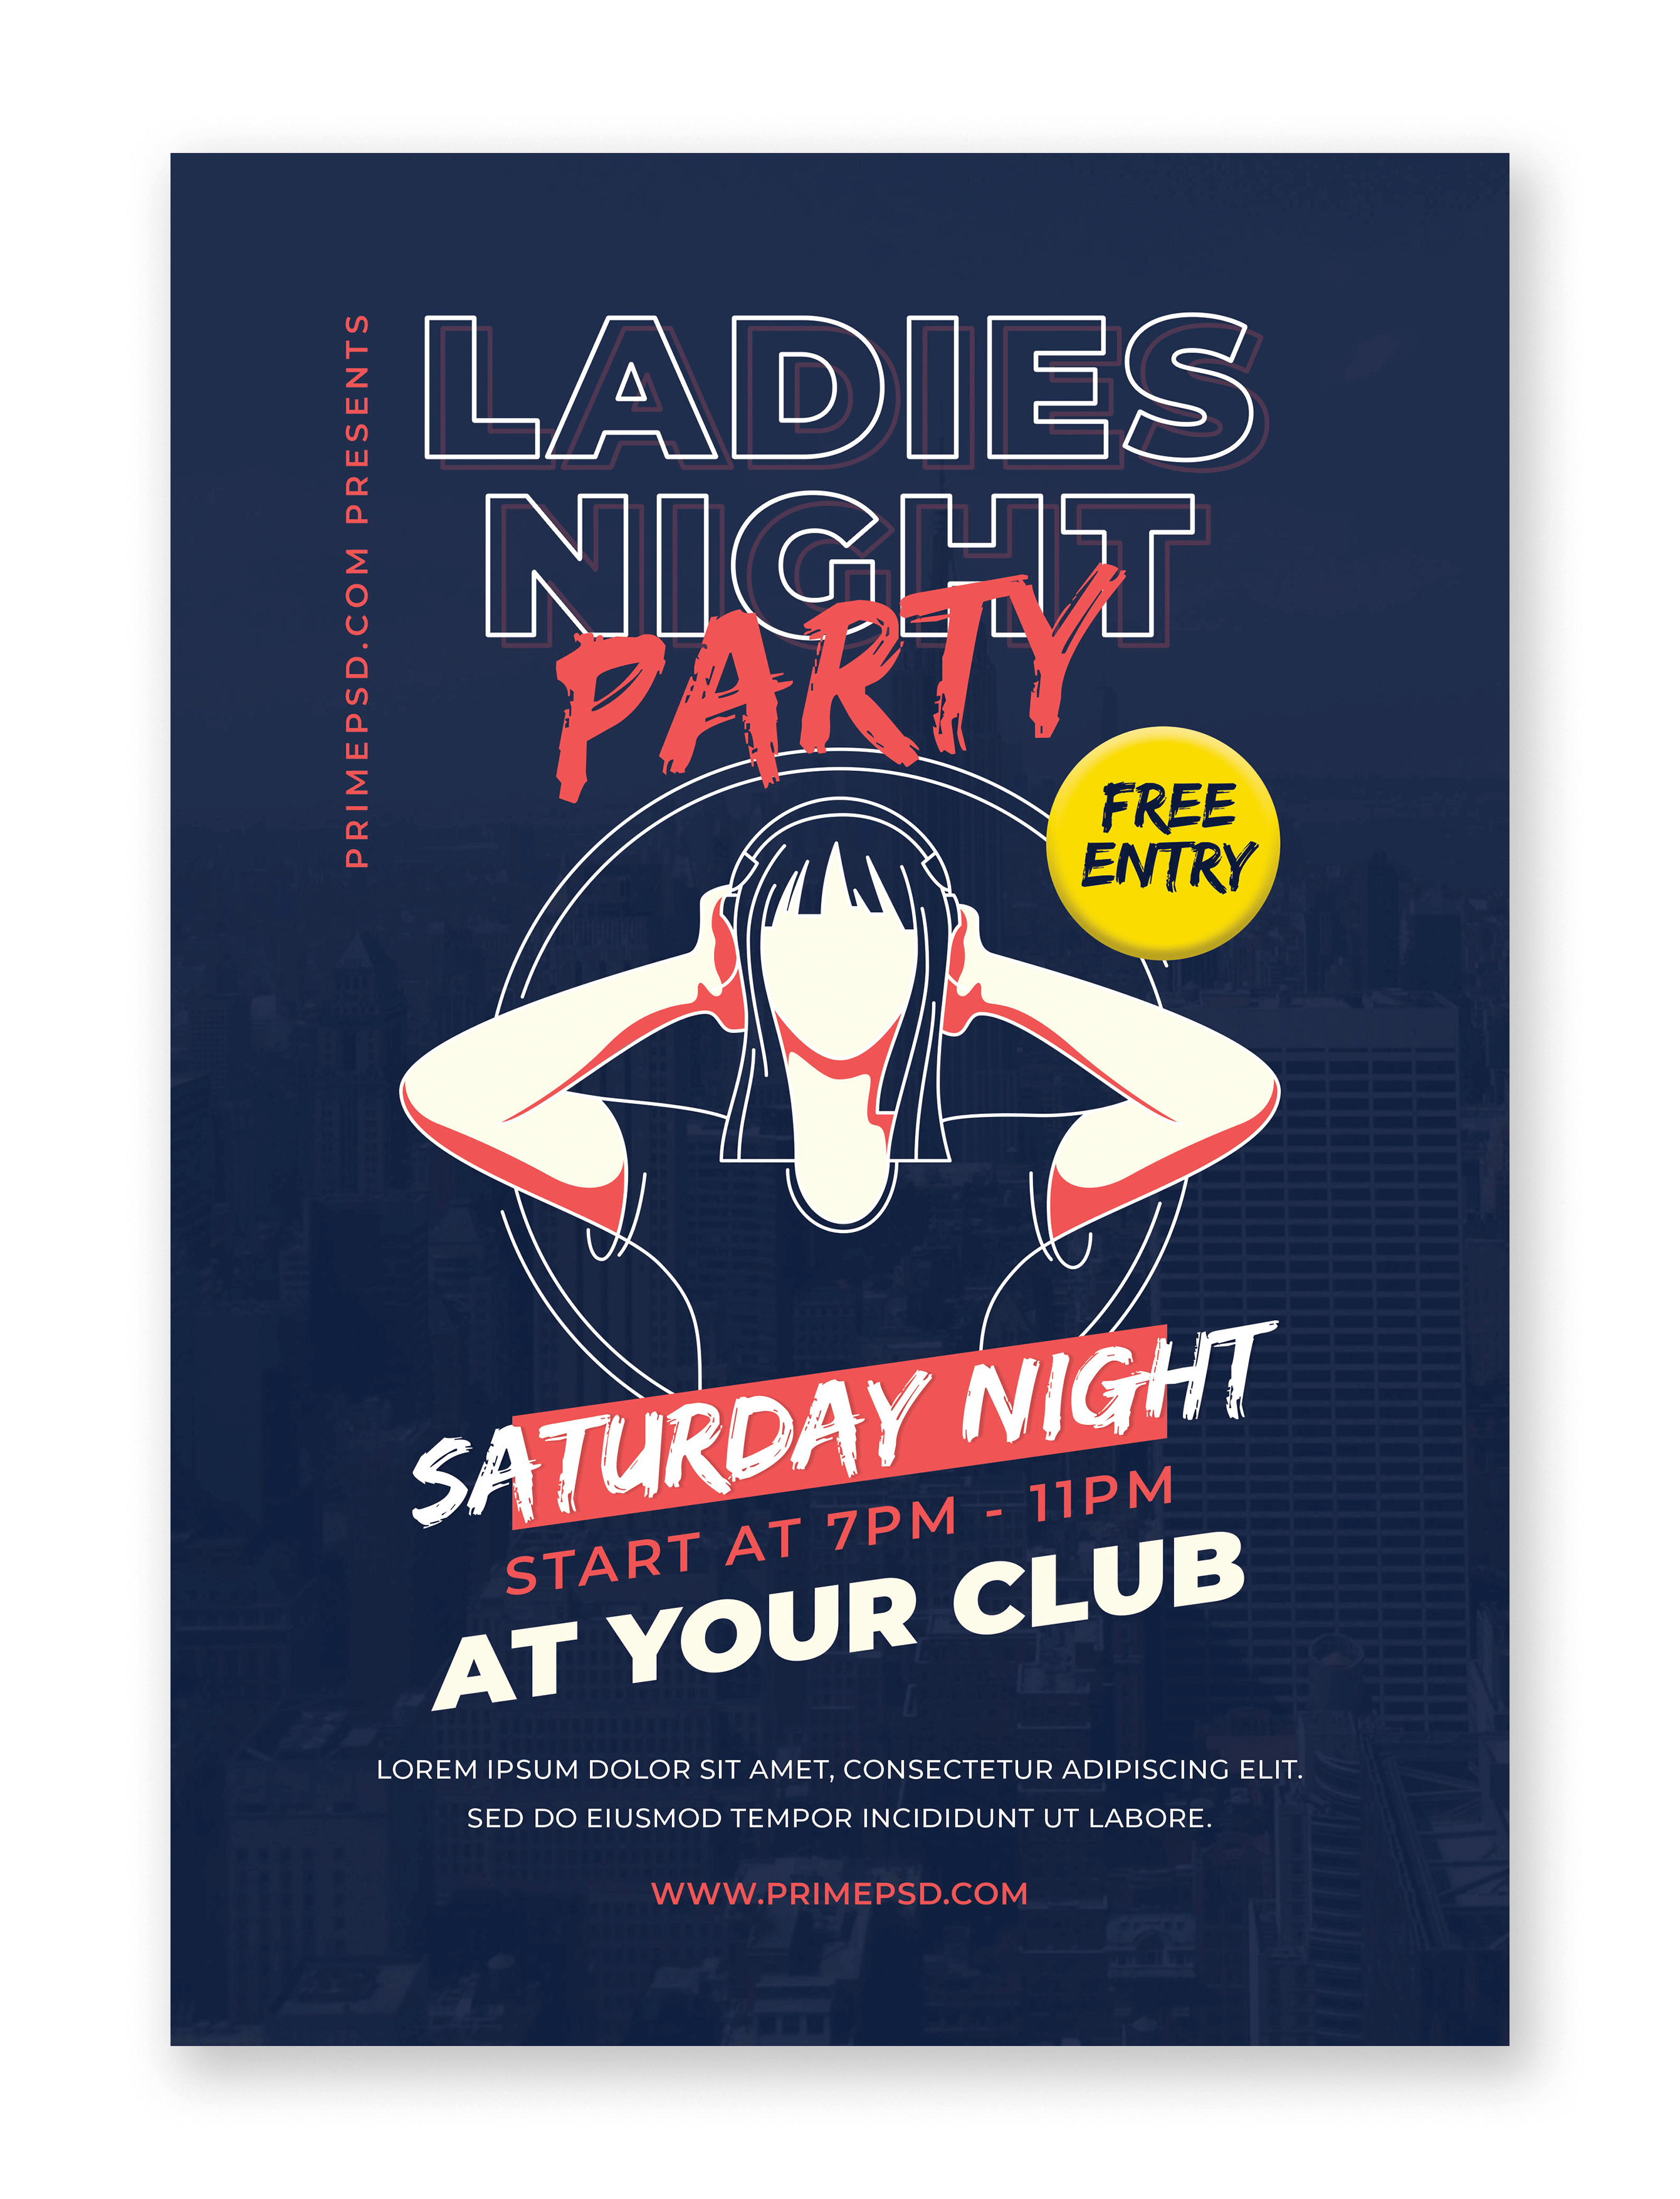 Ladies night party flyer psd